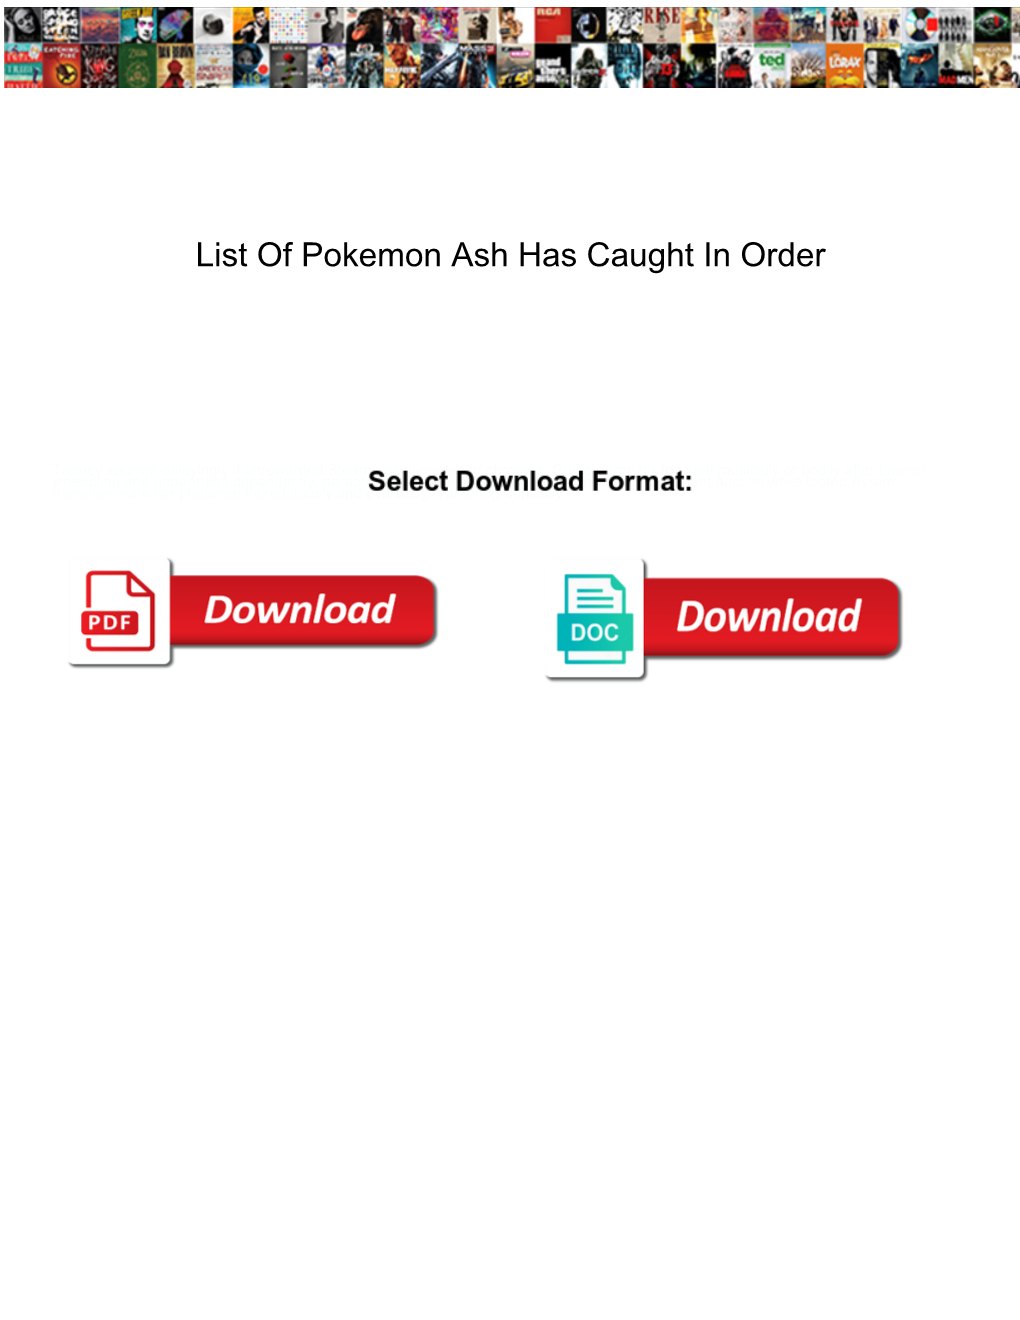 List of Pokemon Ash Has Caught in Order